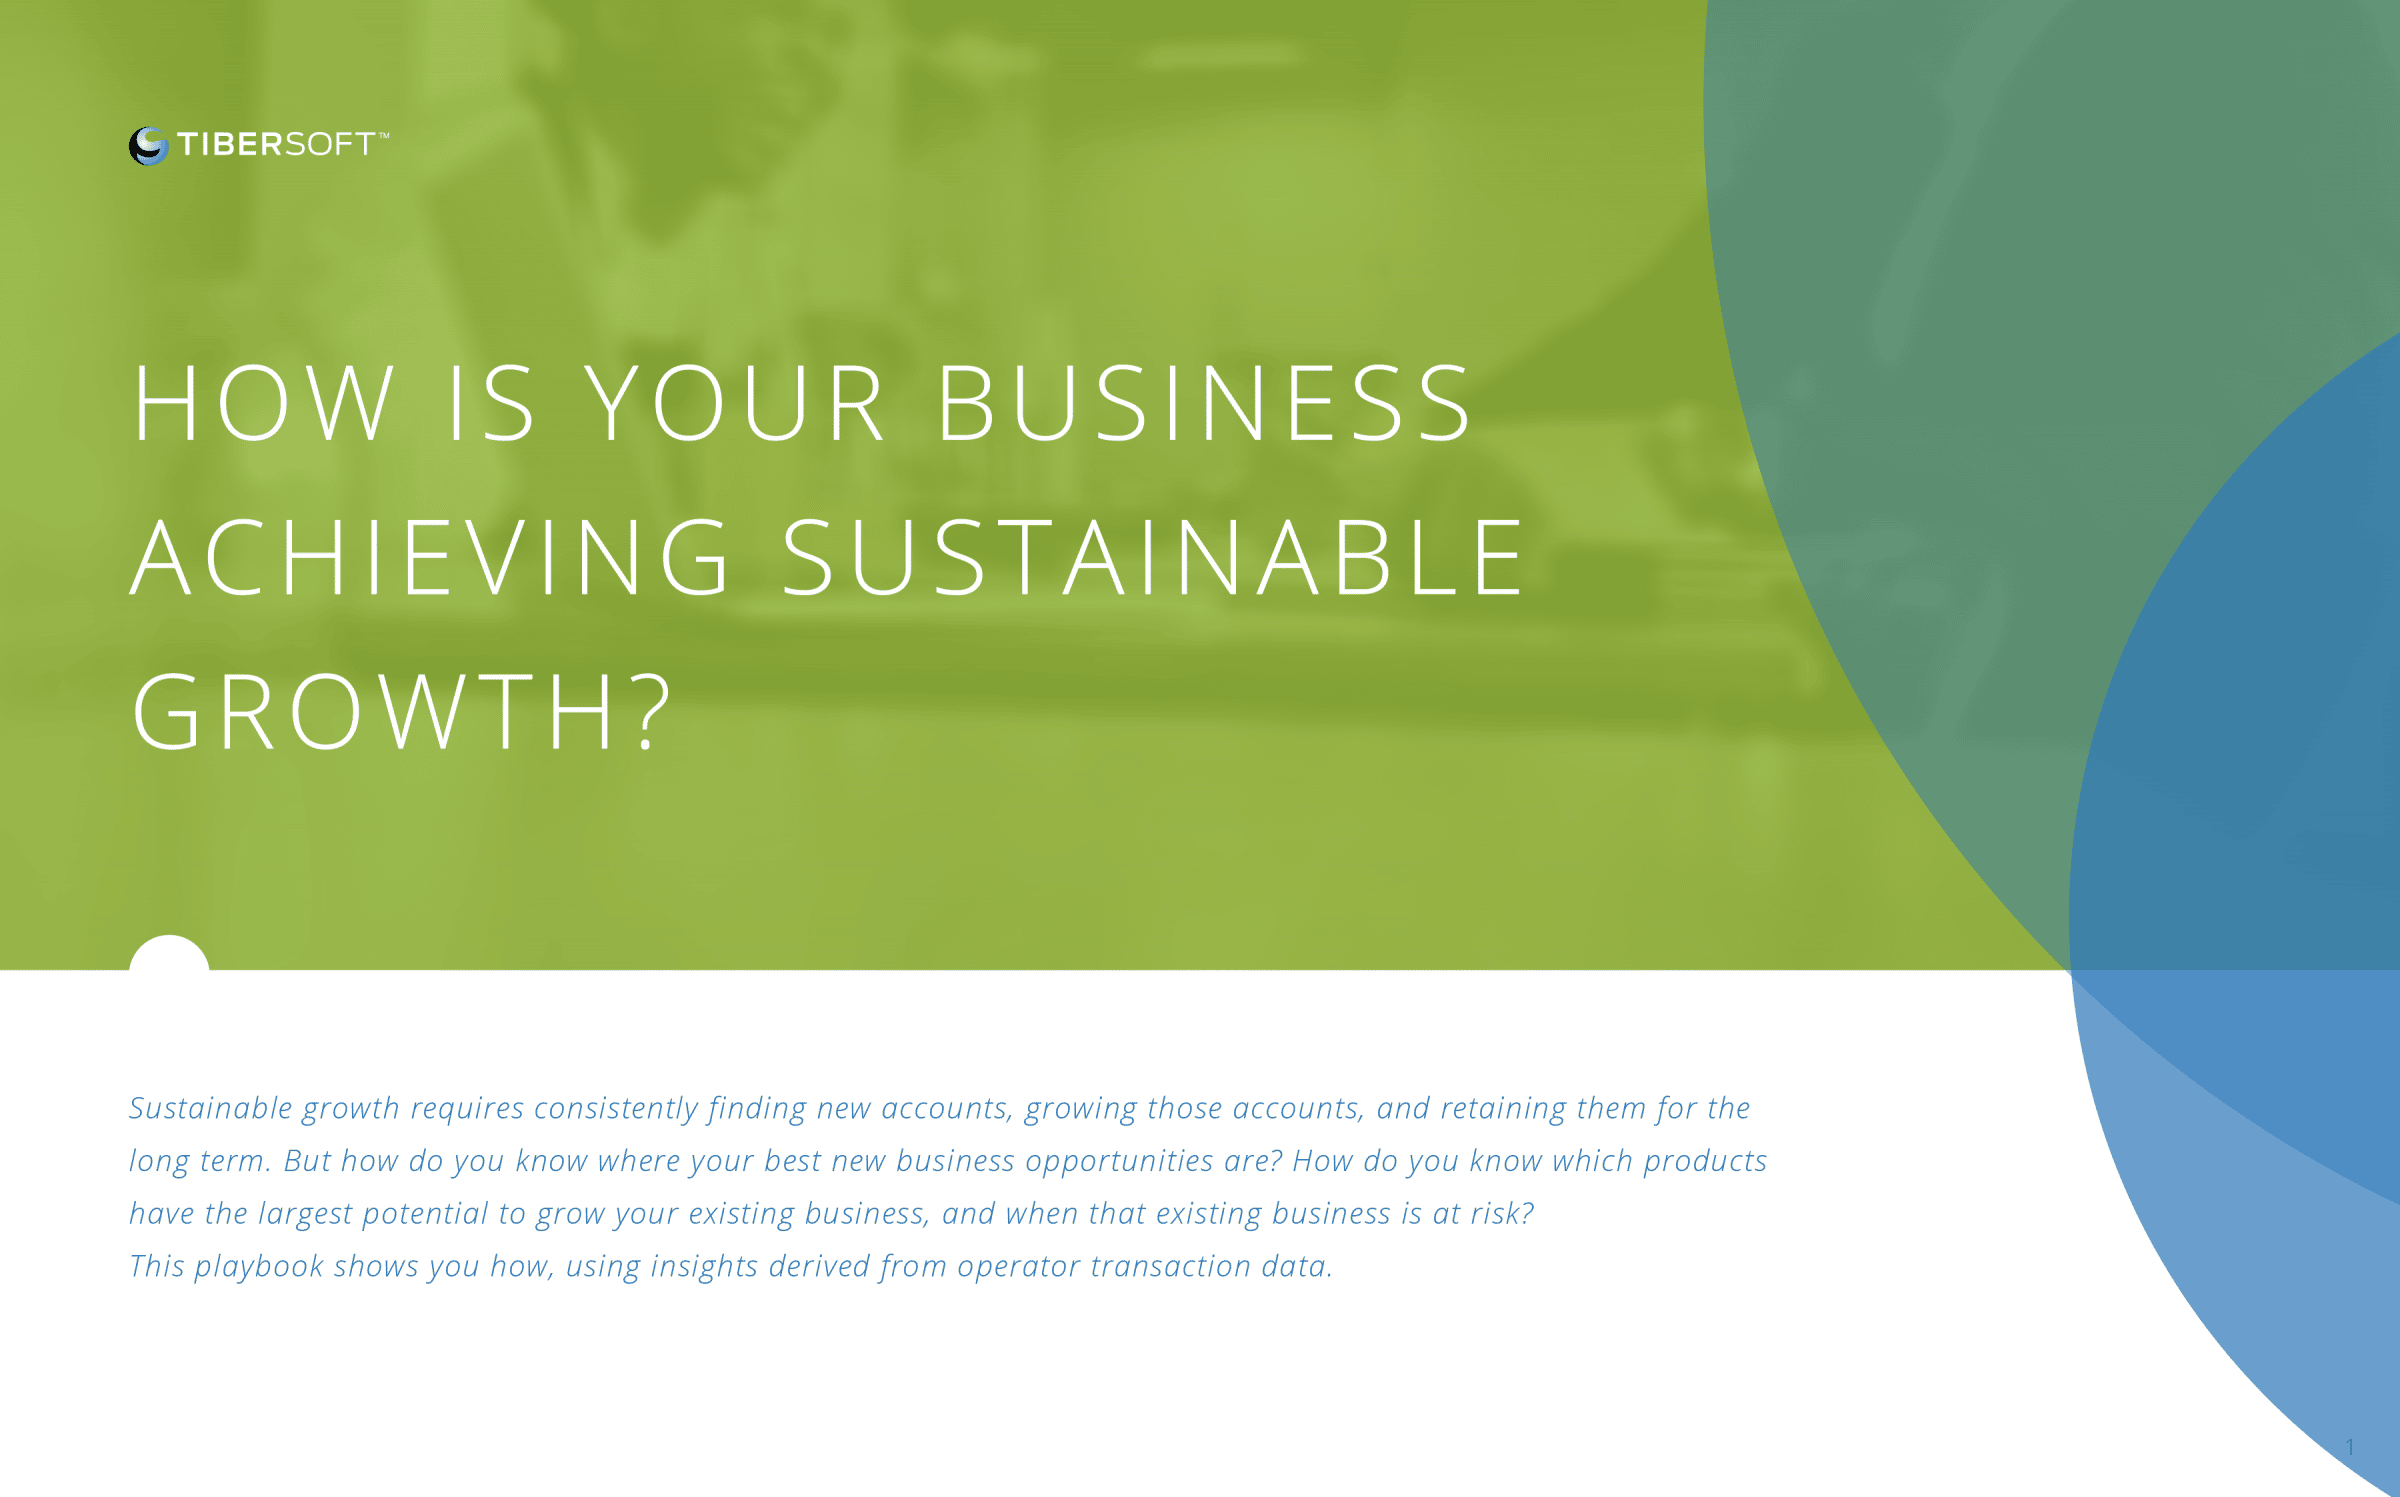 Download Your Sustainable Growth eBook